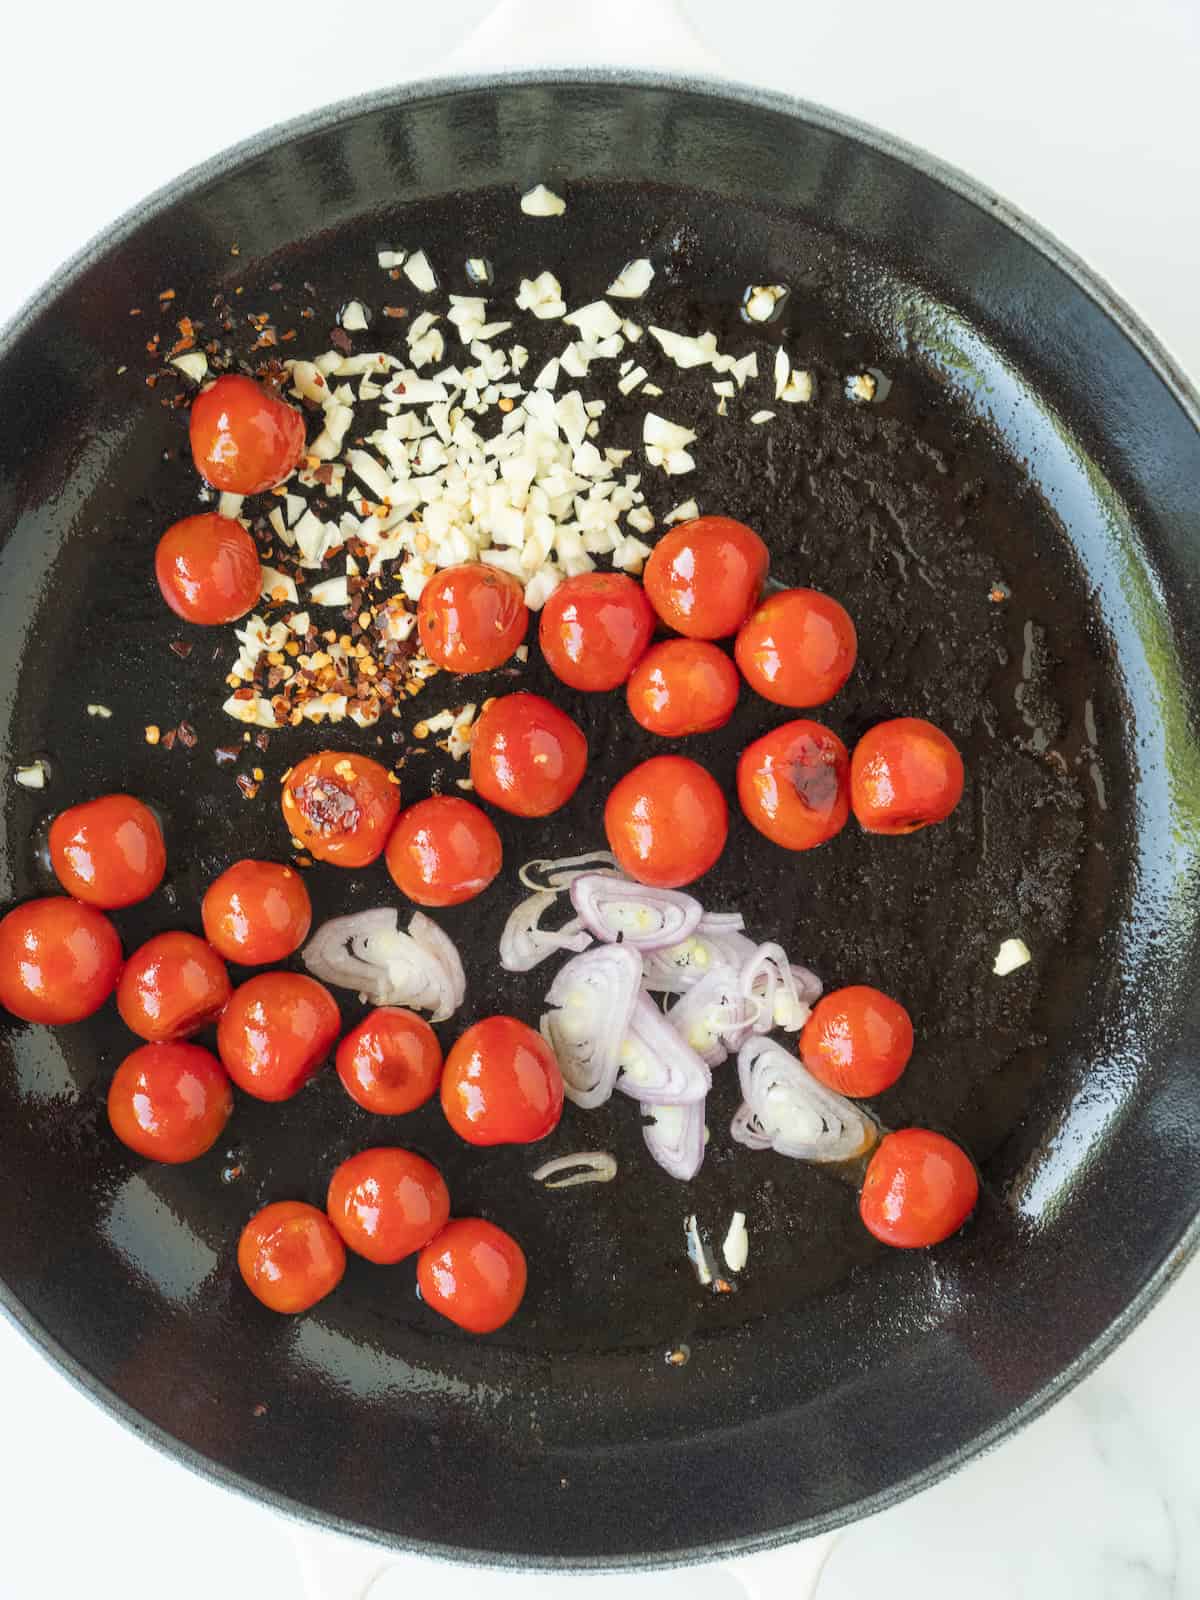 A skillet with cherry tomatoes blistered in olive oil, along with red pepper flakes, shallots and garlic added.